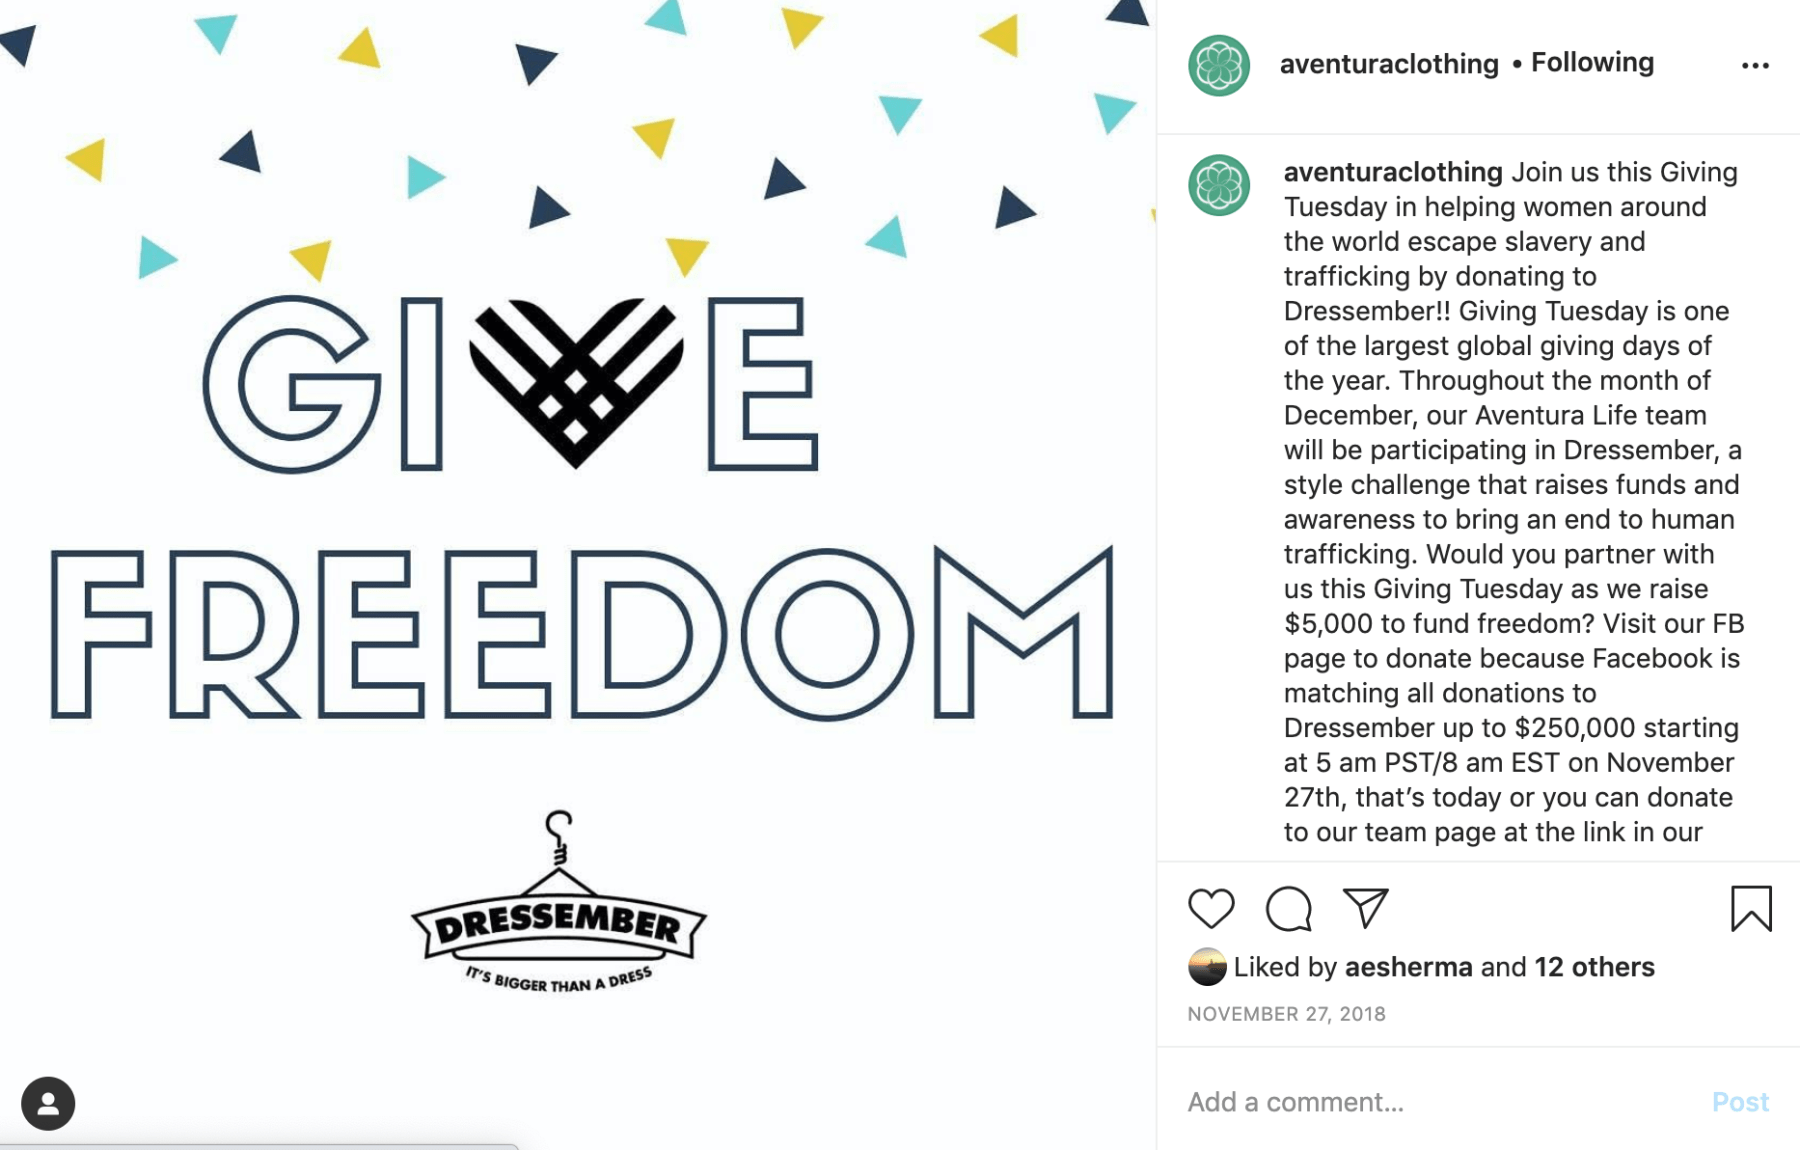 An Instagram post from Aventura about the Dressember initiative.